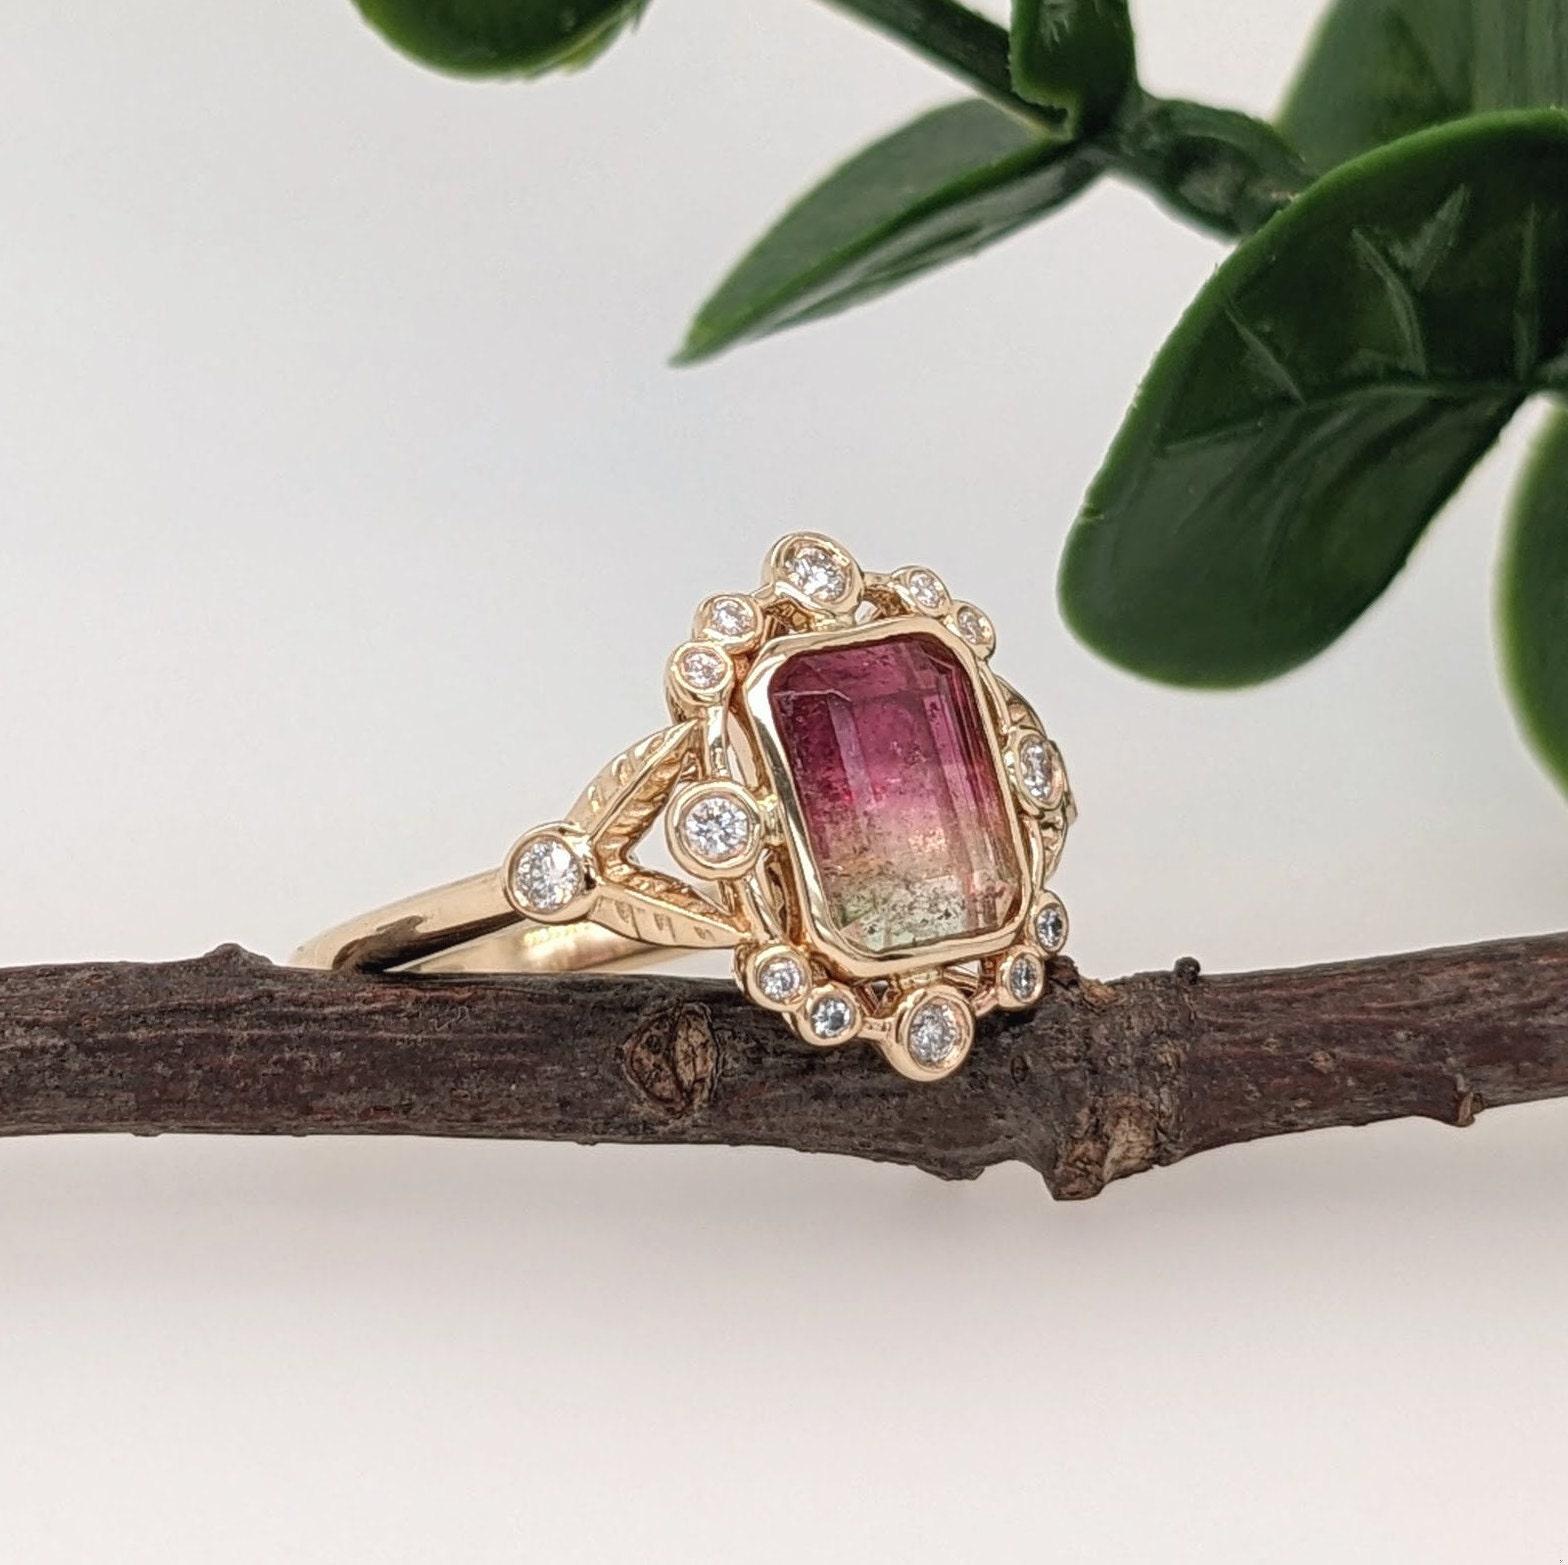 2ct Watermelon Tourmaline Ring w Earth Mined Diamonds in Solid 14K Gold EM 8x6mm For Sale 2